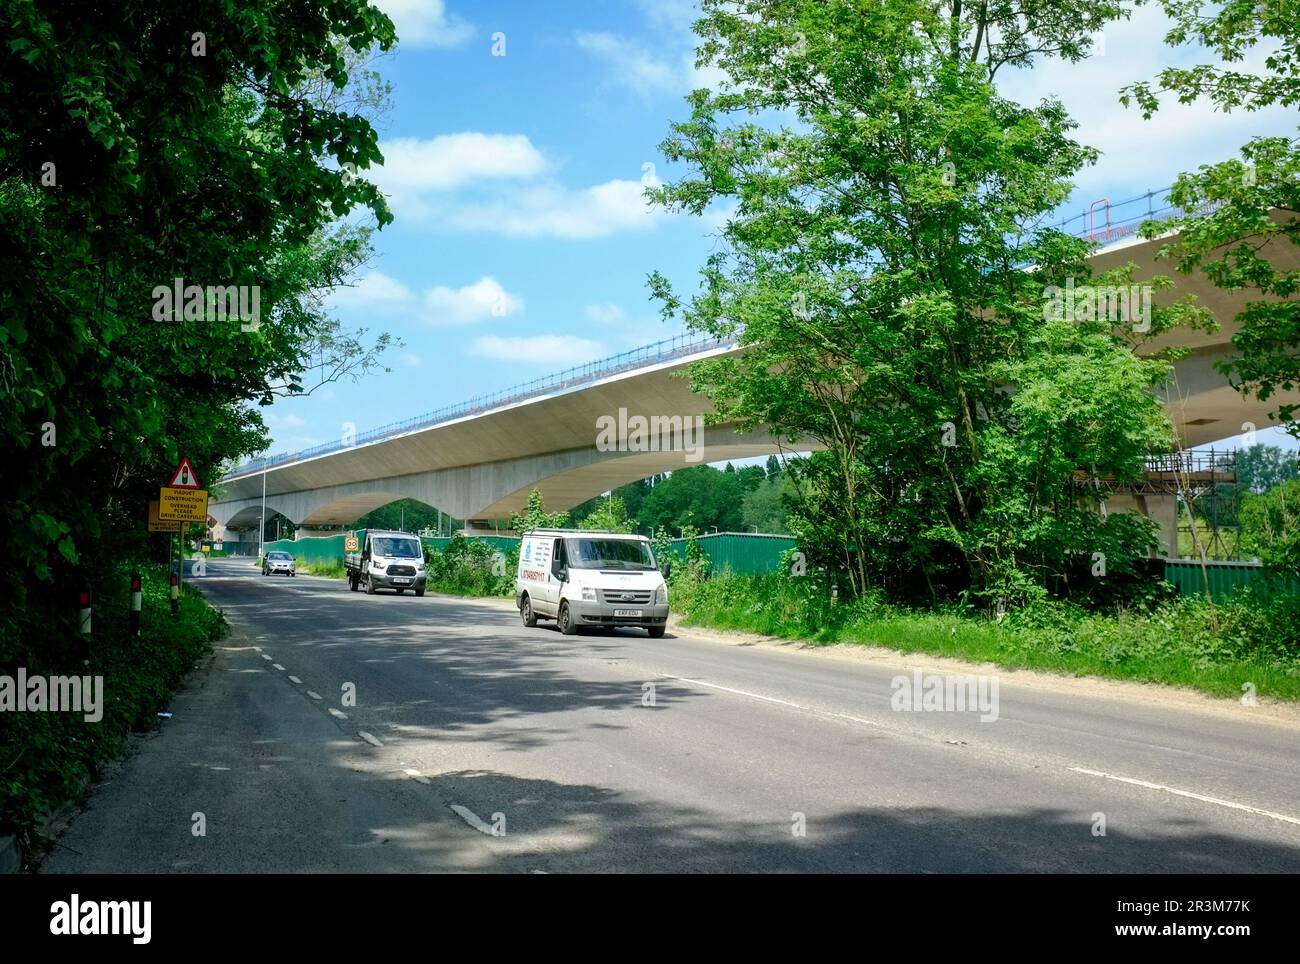 A nearly completed part of the HS2 railway Bridge or Viaduct between Denham, Buckinghamshire and, West Hyde, Hertfordshire. Stock Photo